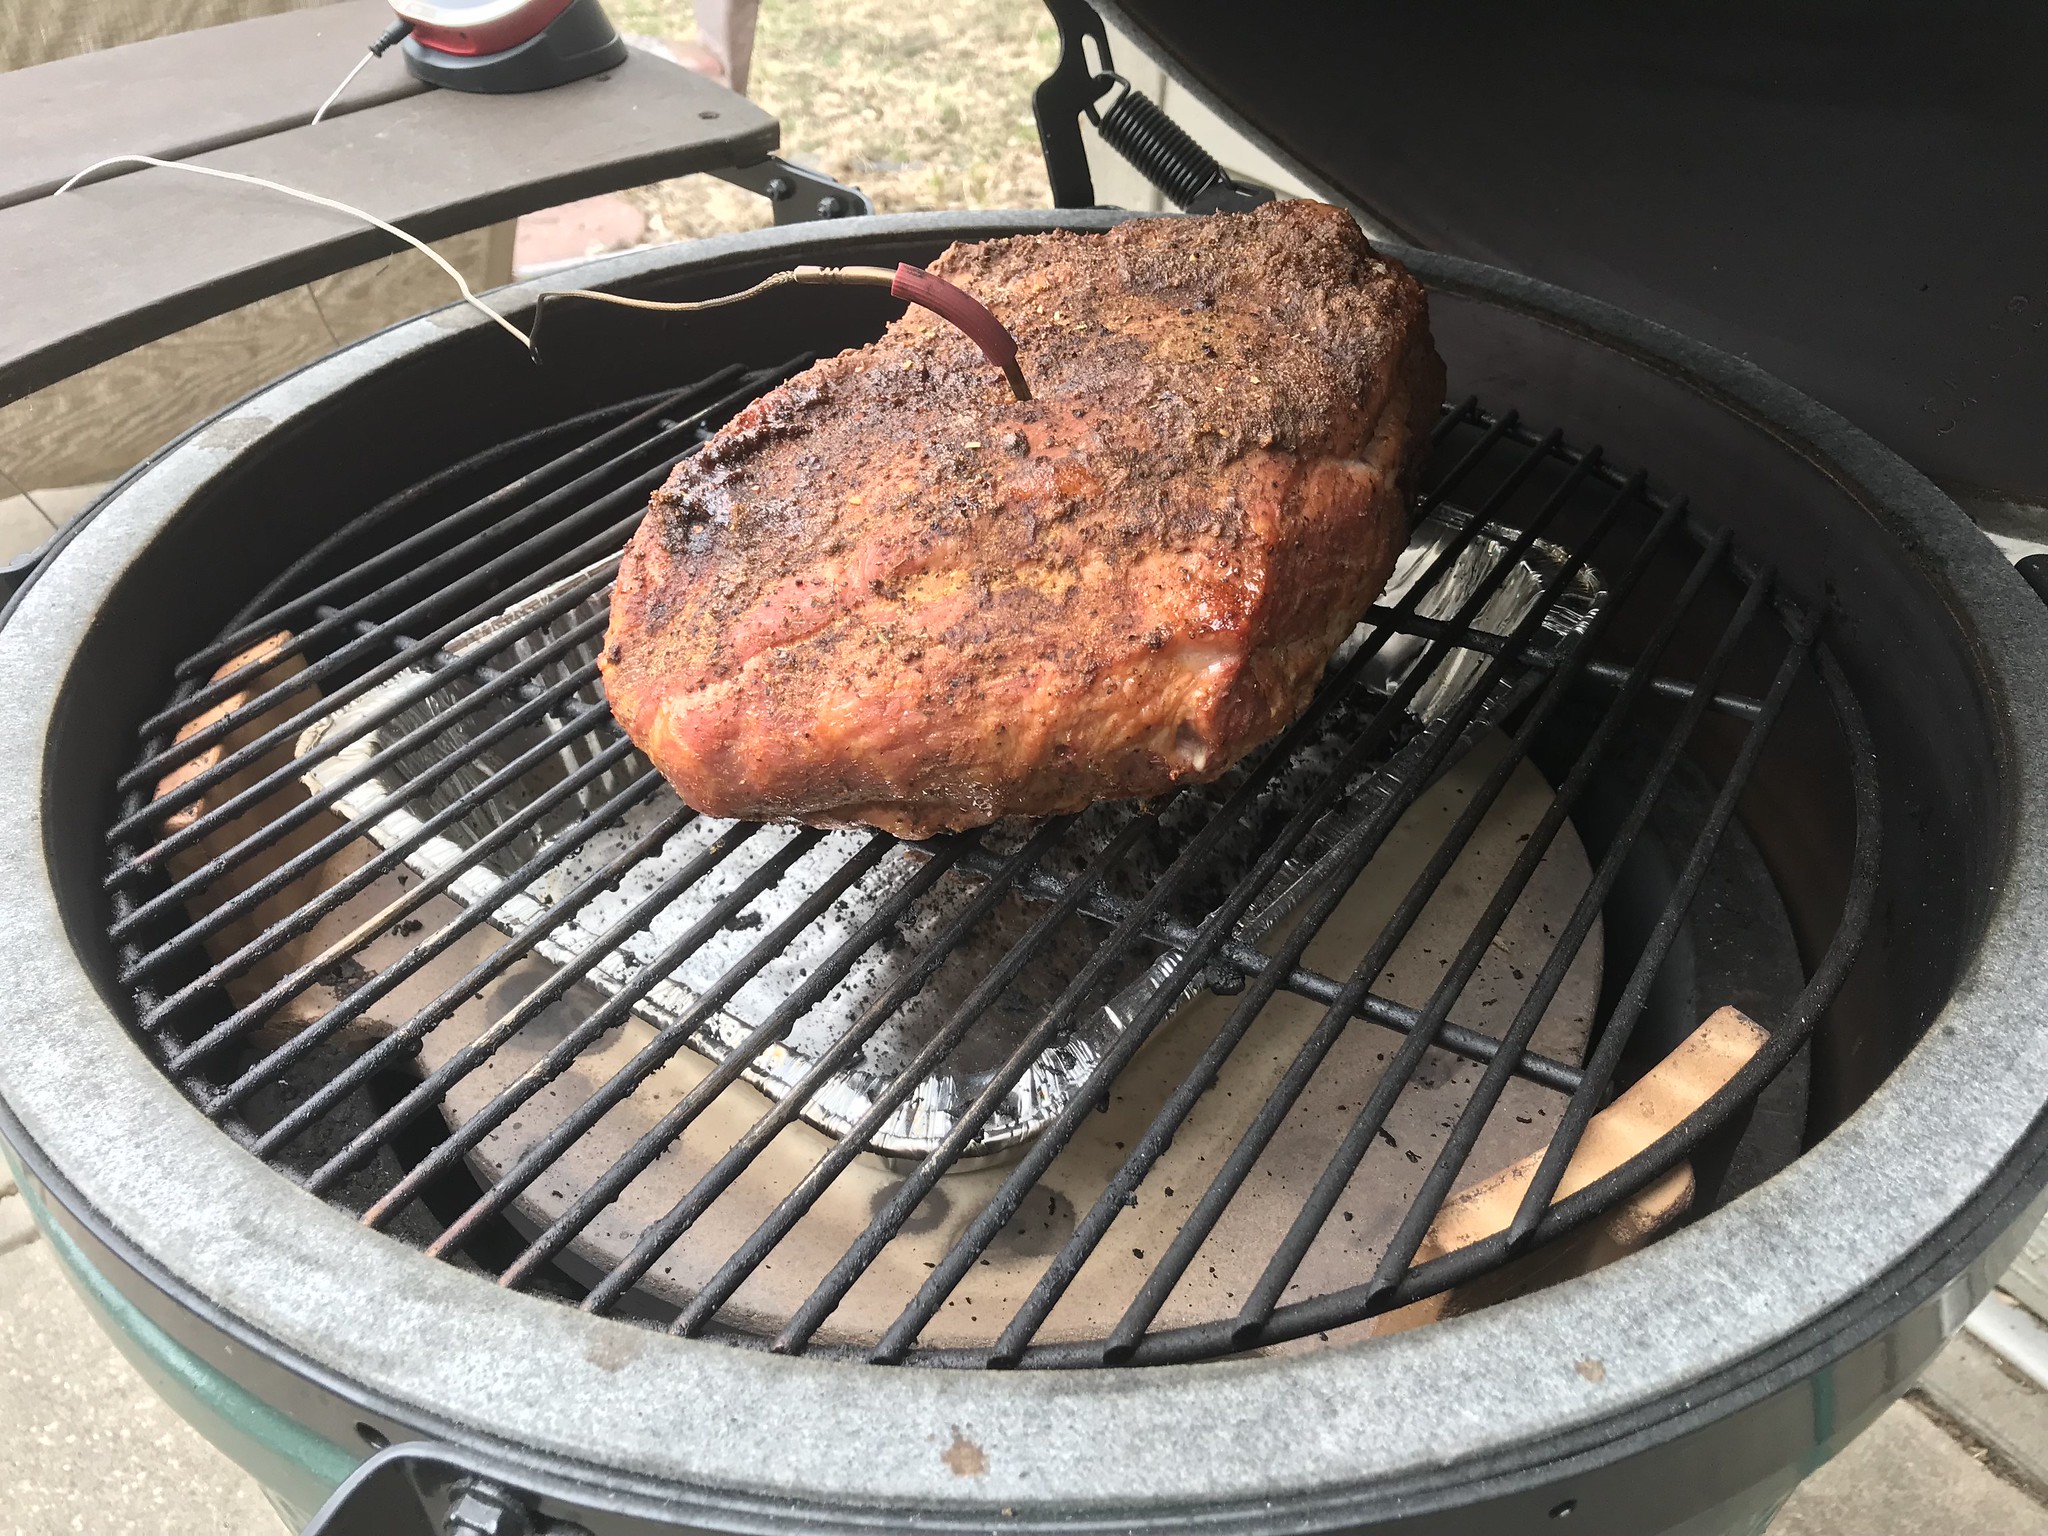 Two Hours into the Cook